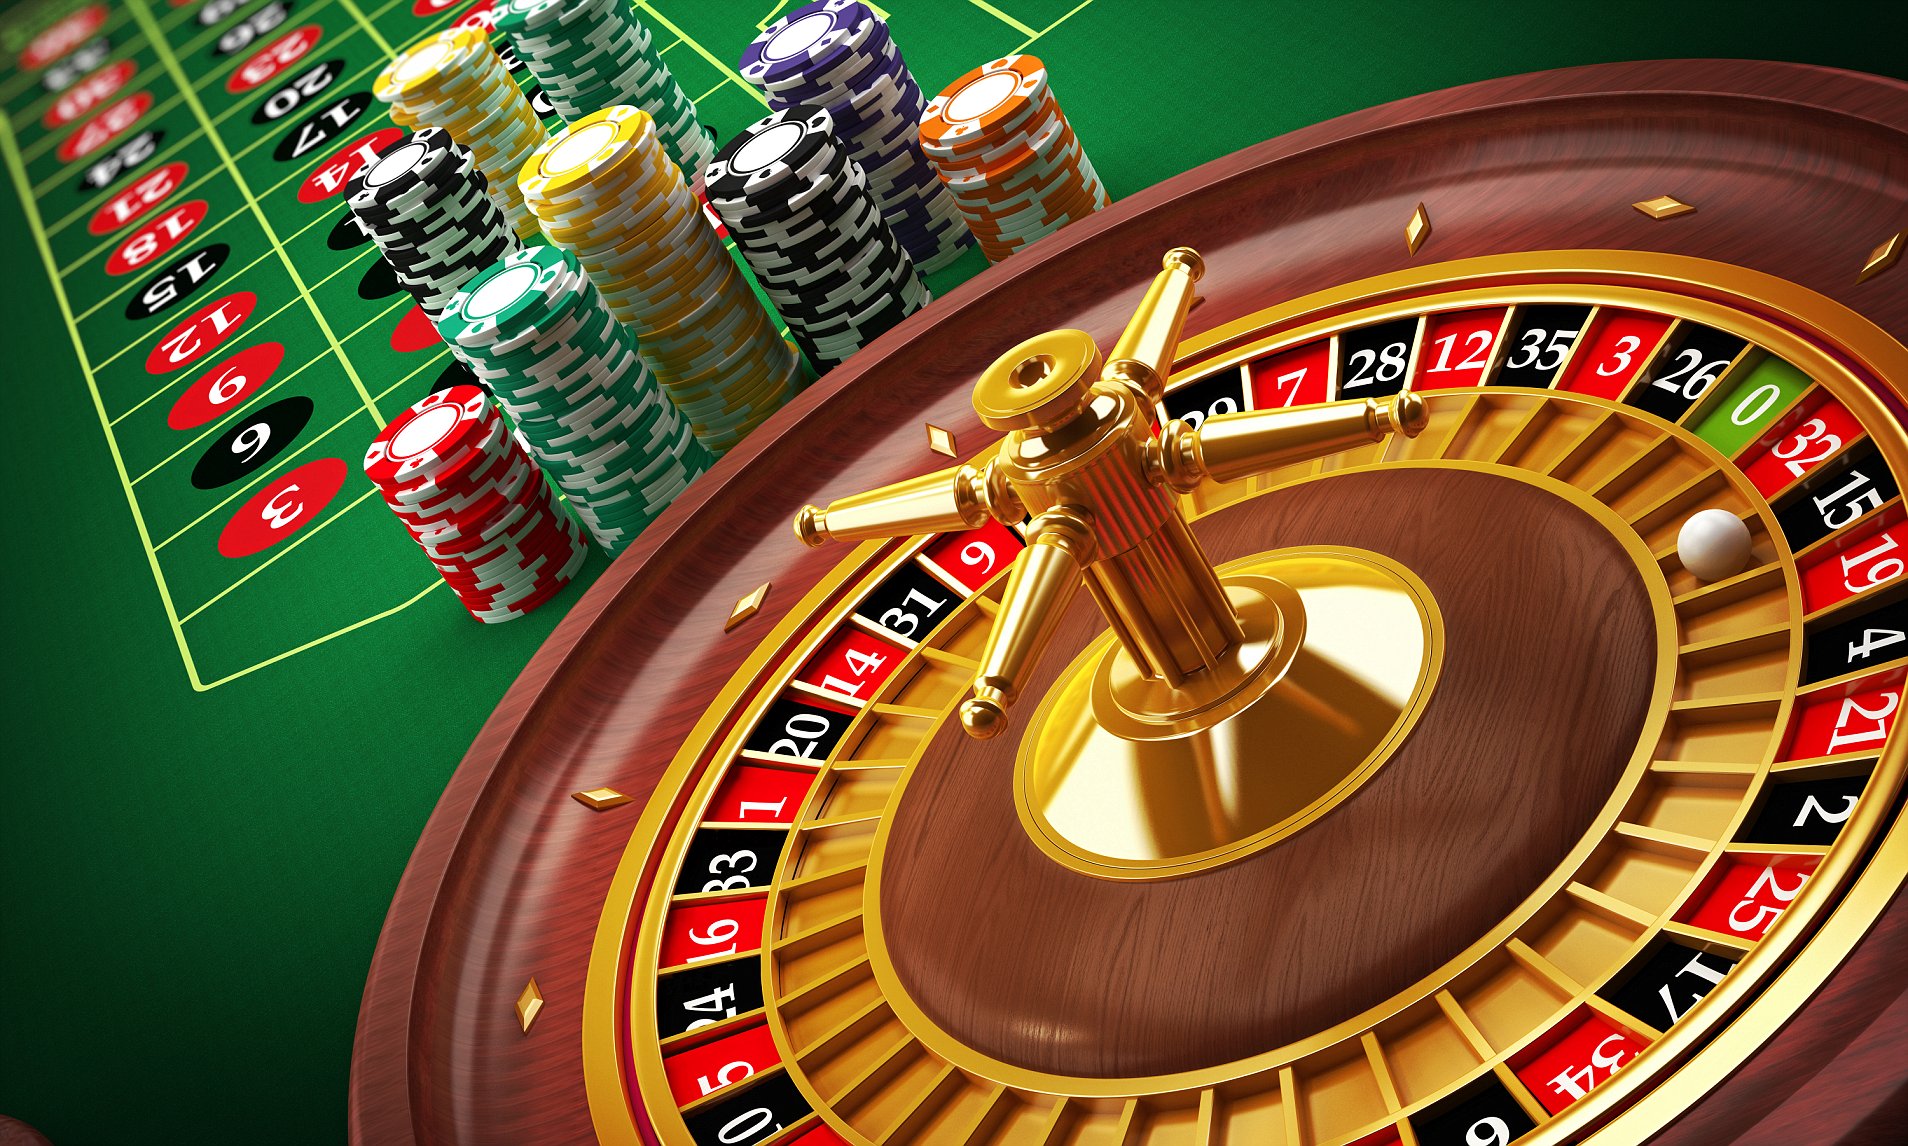 Choosing the best Roulette Table Strategy